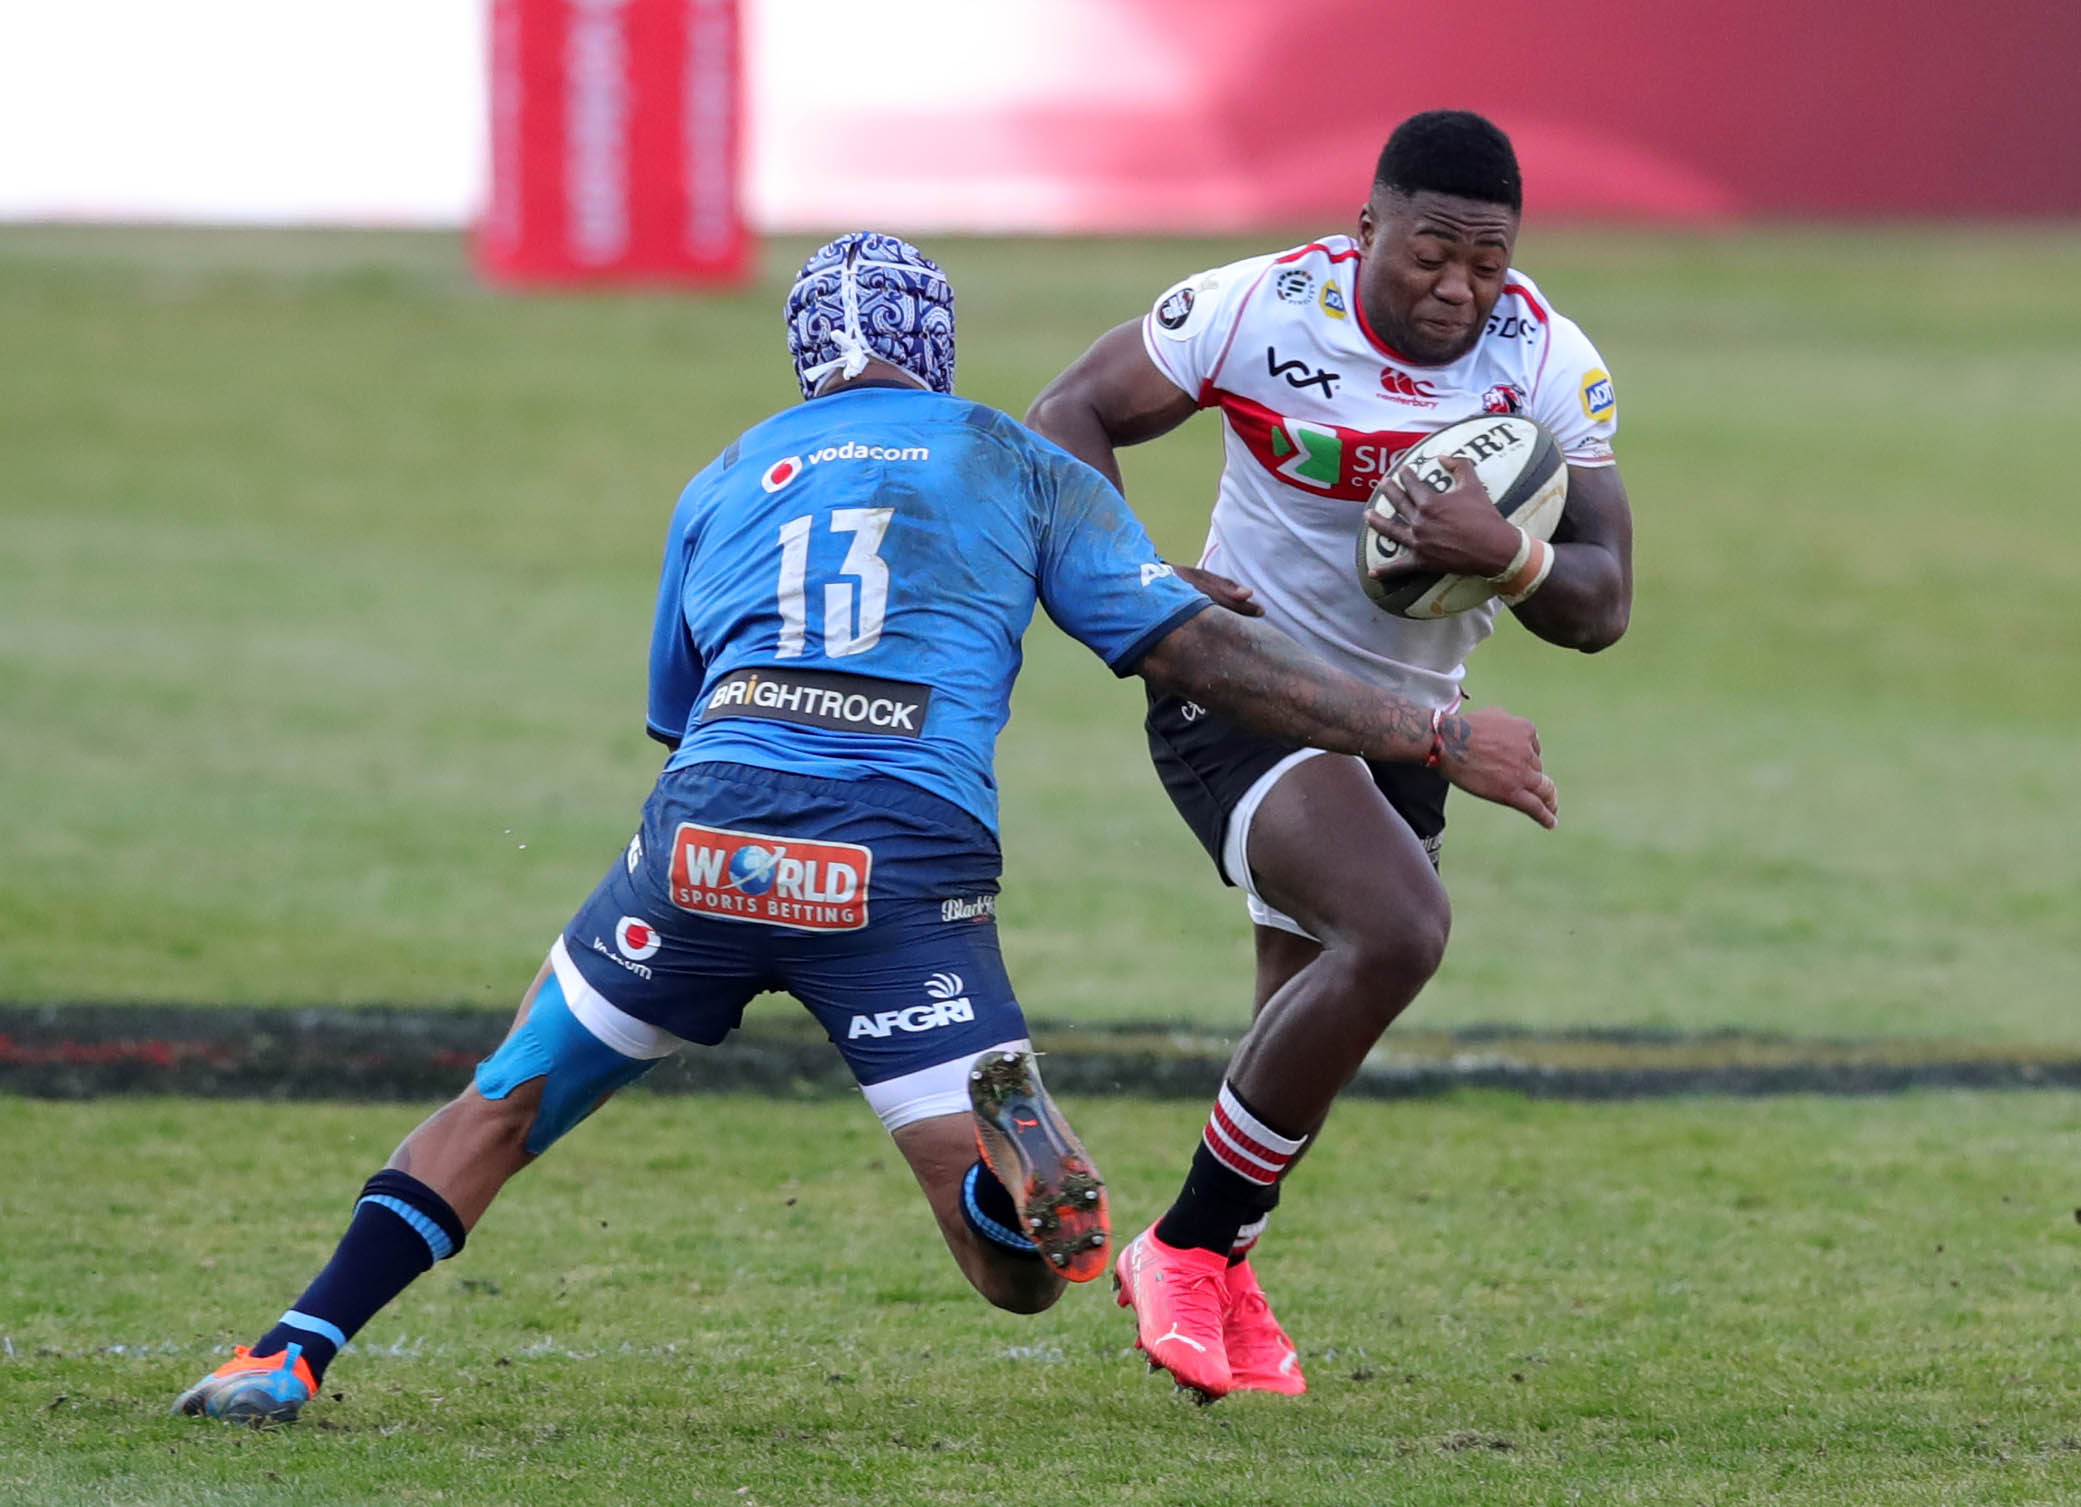 Wandisile Simelane of the Lions challenged by Lionel Mapoe of the Bulls during the 2021 Carling Currie Cup match between Bulls and Lions at Loftus Versfeld Stadium, Pretoria, on 25 July 2021 ©Samuel Shivambu/BackpagePix